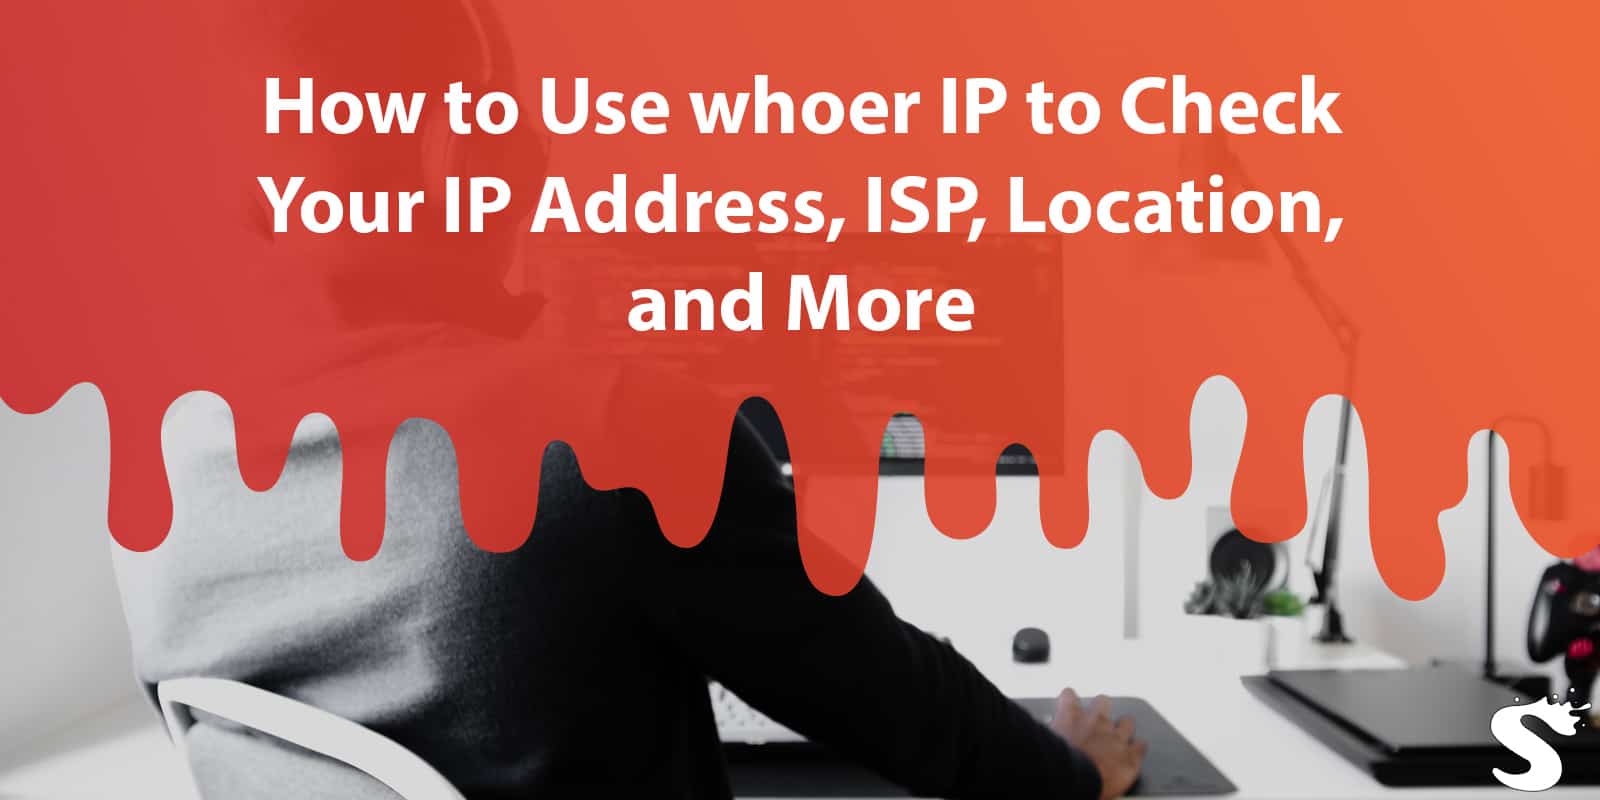 How to Use whoer IP to Check Your IP Address, ISP, Location, and More